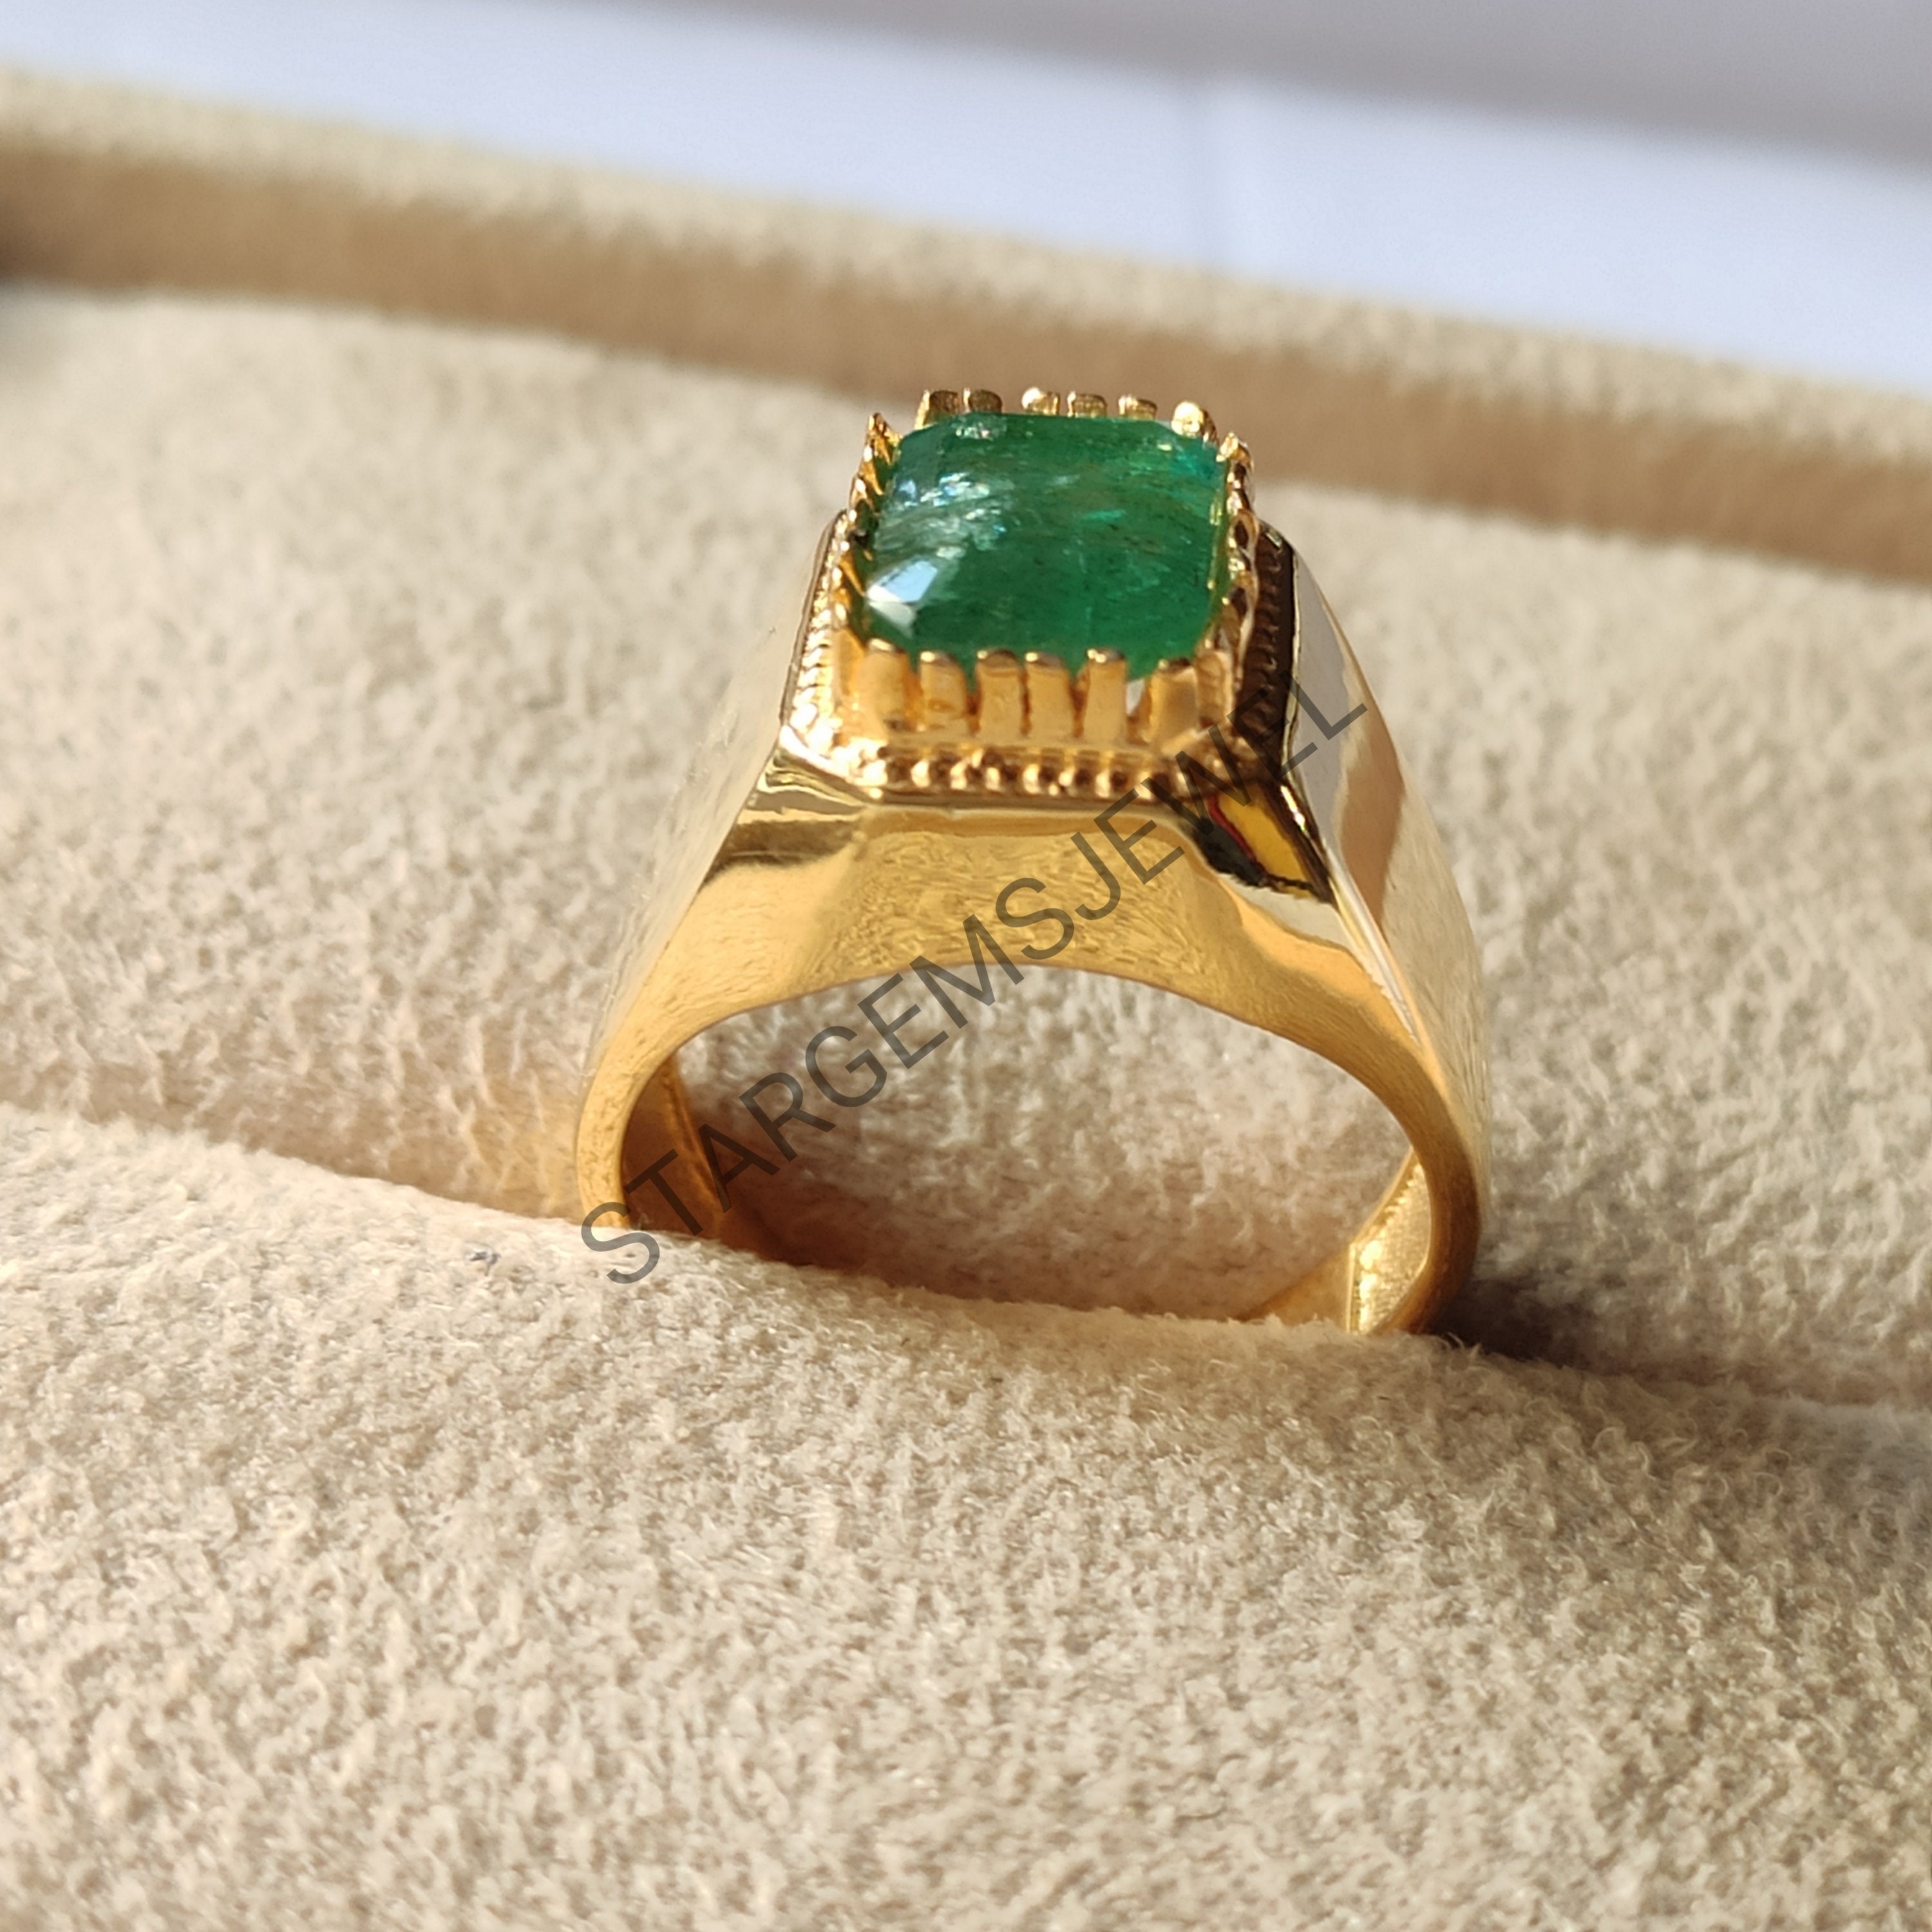 Buy 22Kt Gold Semi Precious Green Stone Ring For Men 94VH3259 Online from  Vaibhav Jewellers